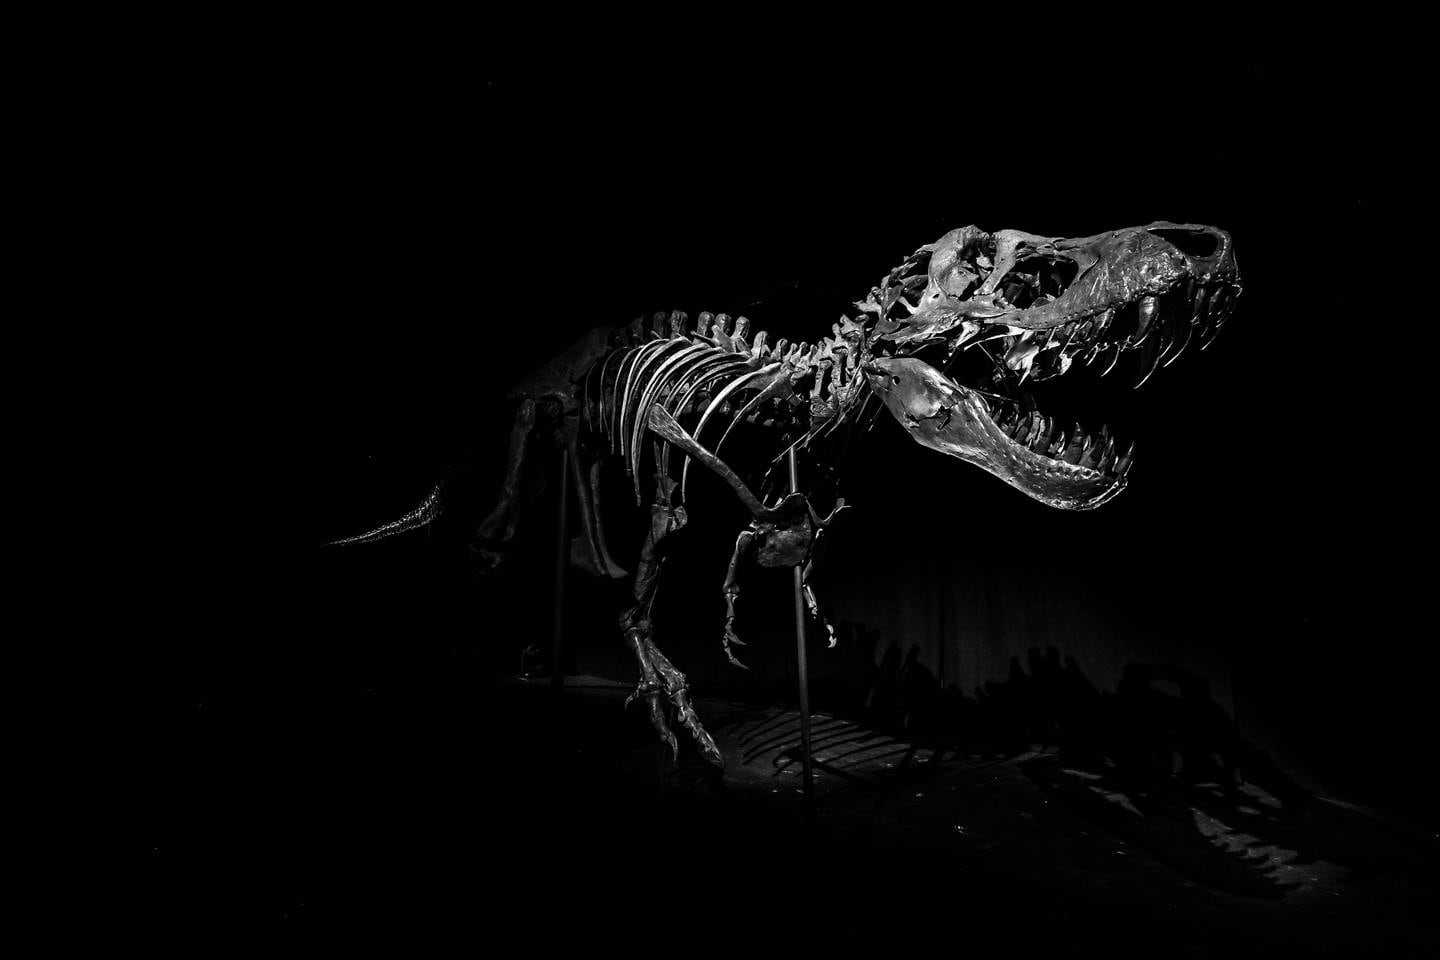 The world-famous 'Tyrannosaurus rex' fossil 'Stan' will be among the museum's highlights. Photo: DCT – Abu Dhabi